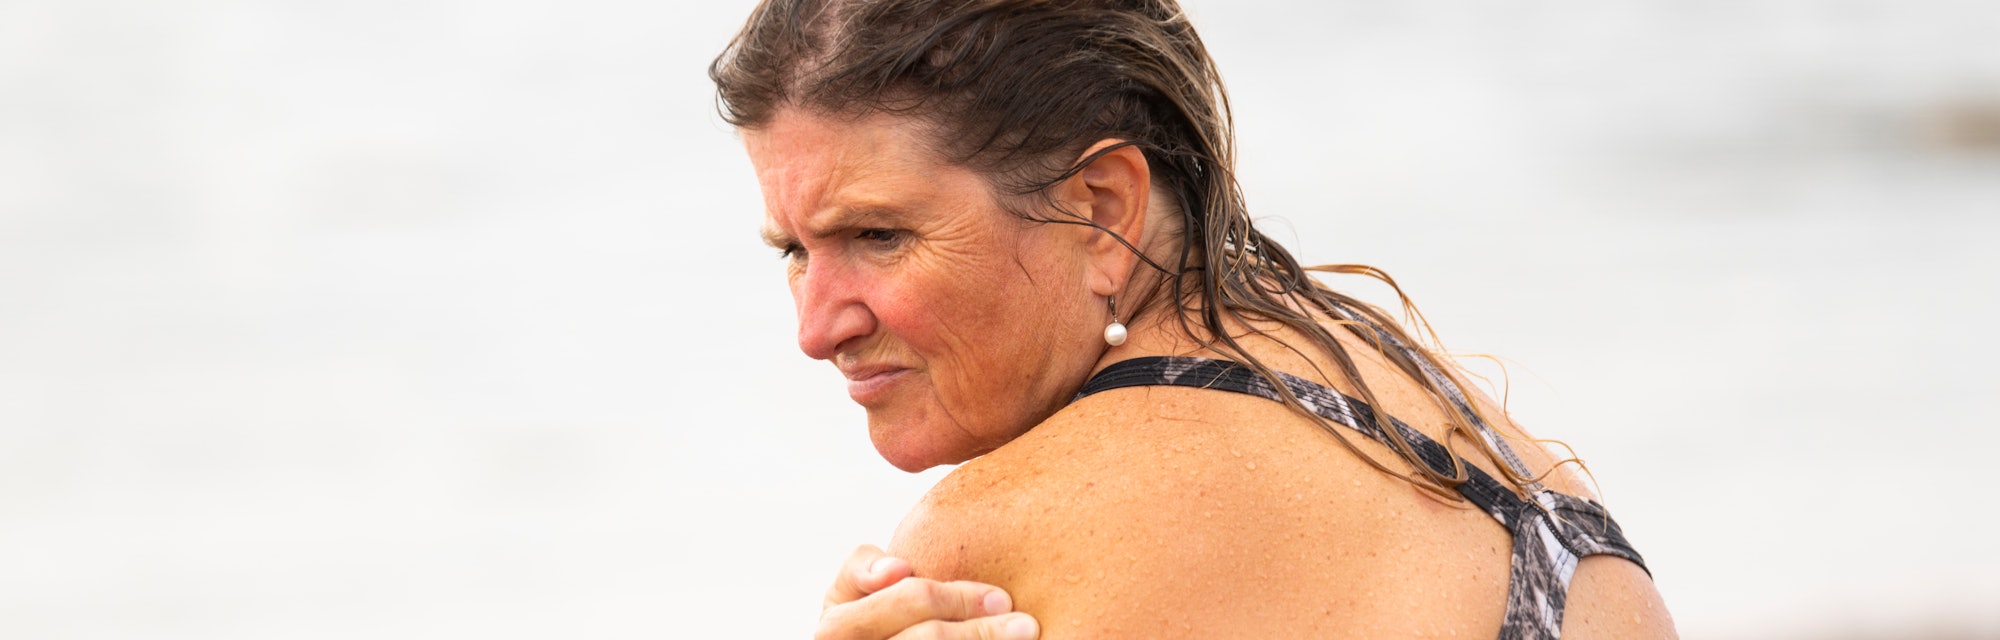 A mature woman with neck and shoulder pain after swimming at the beach